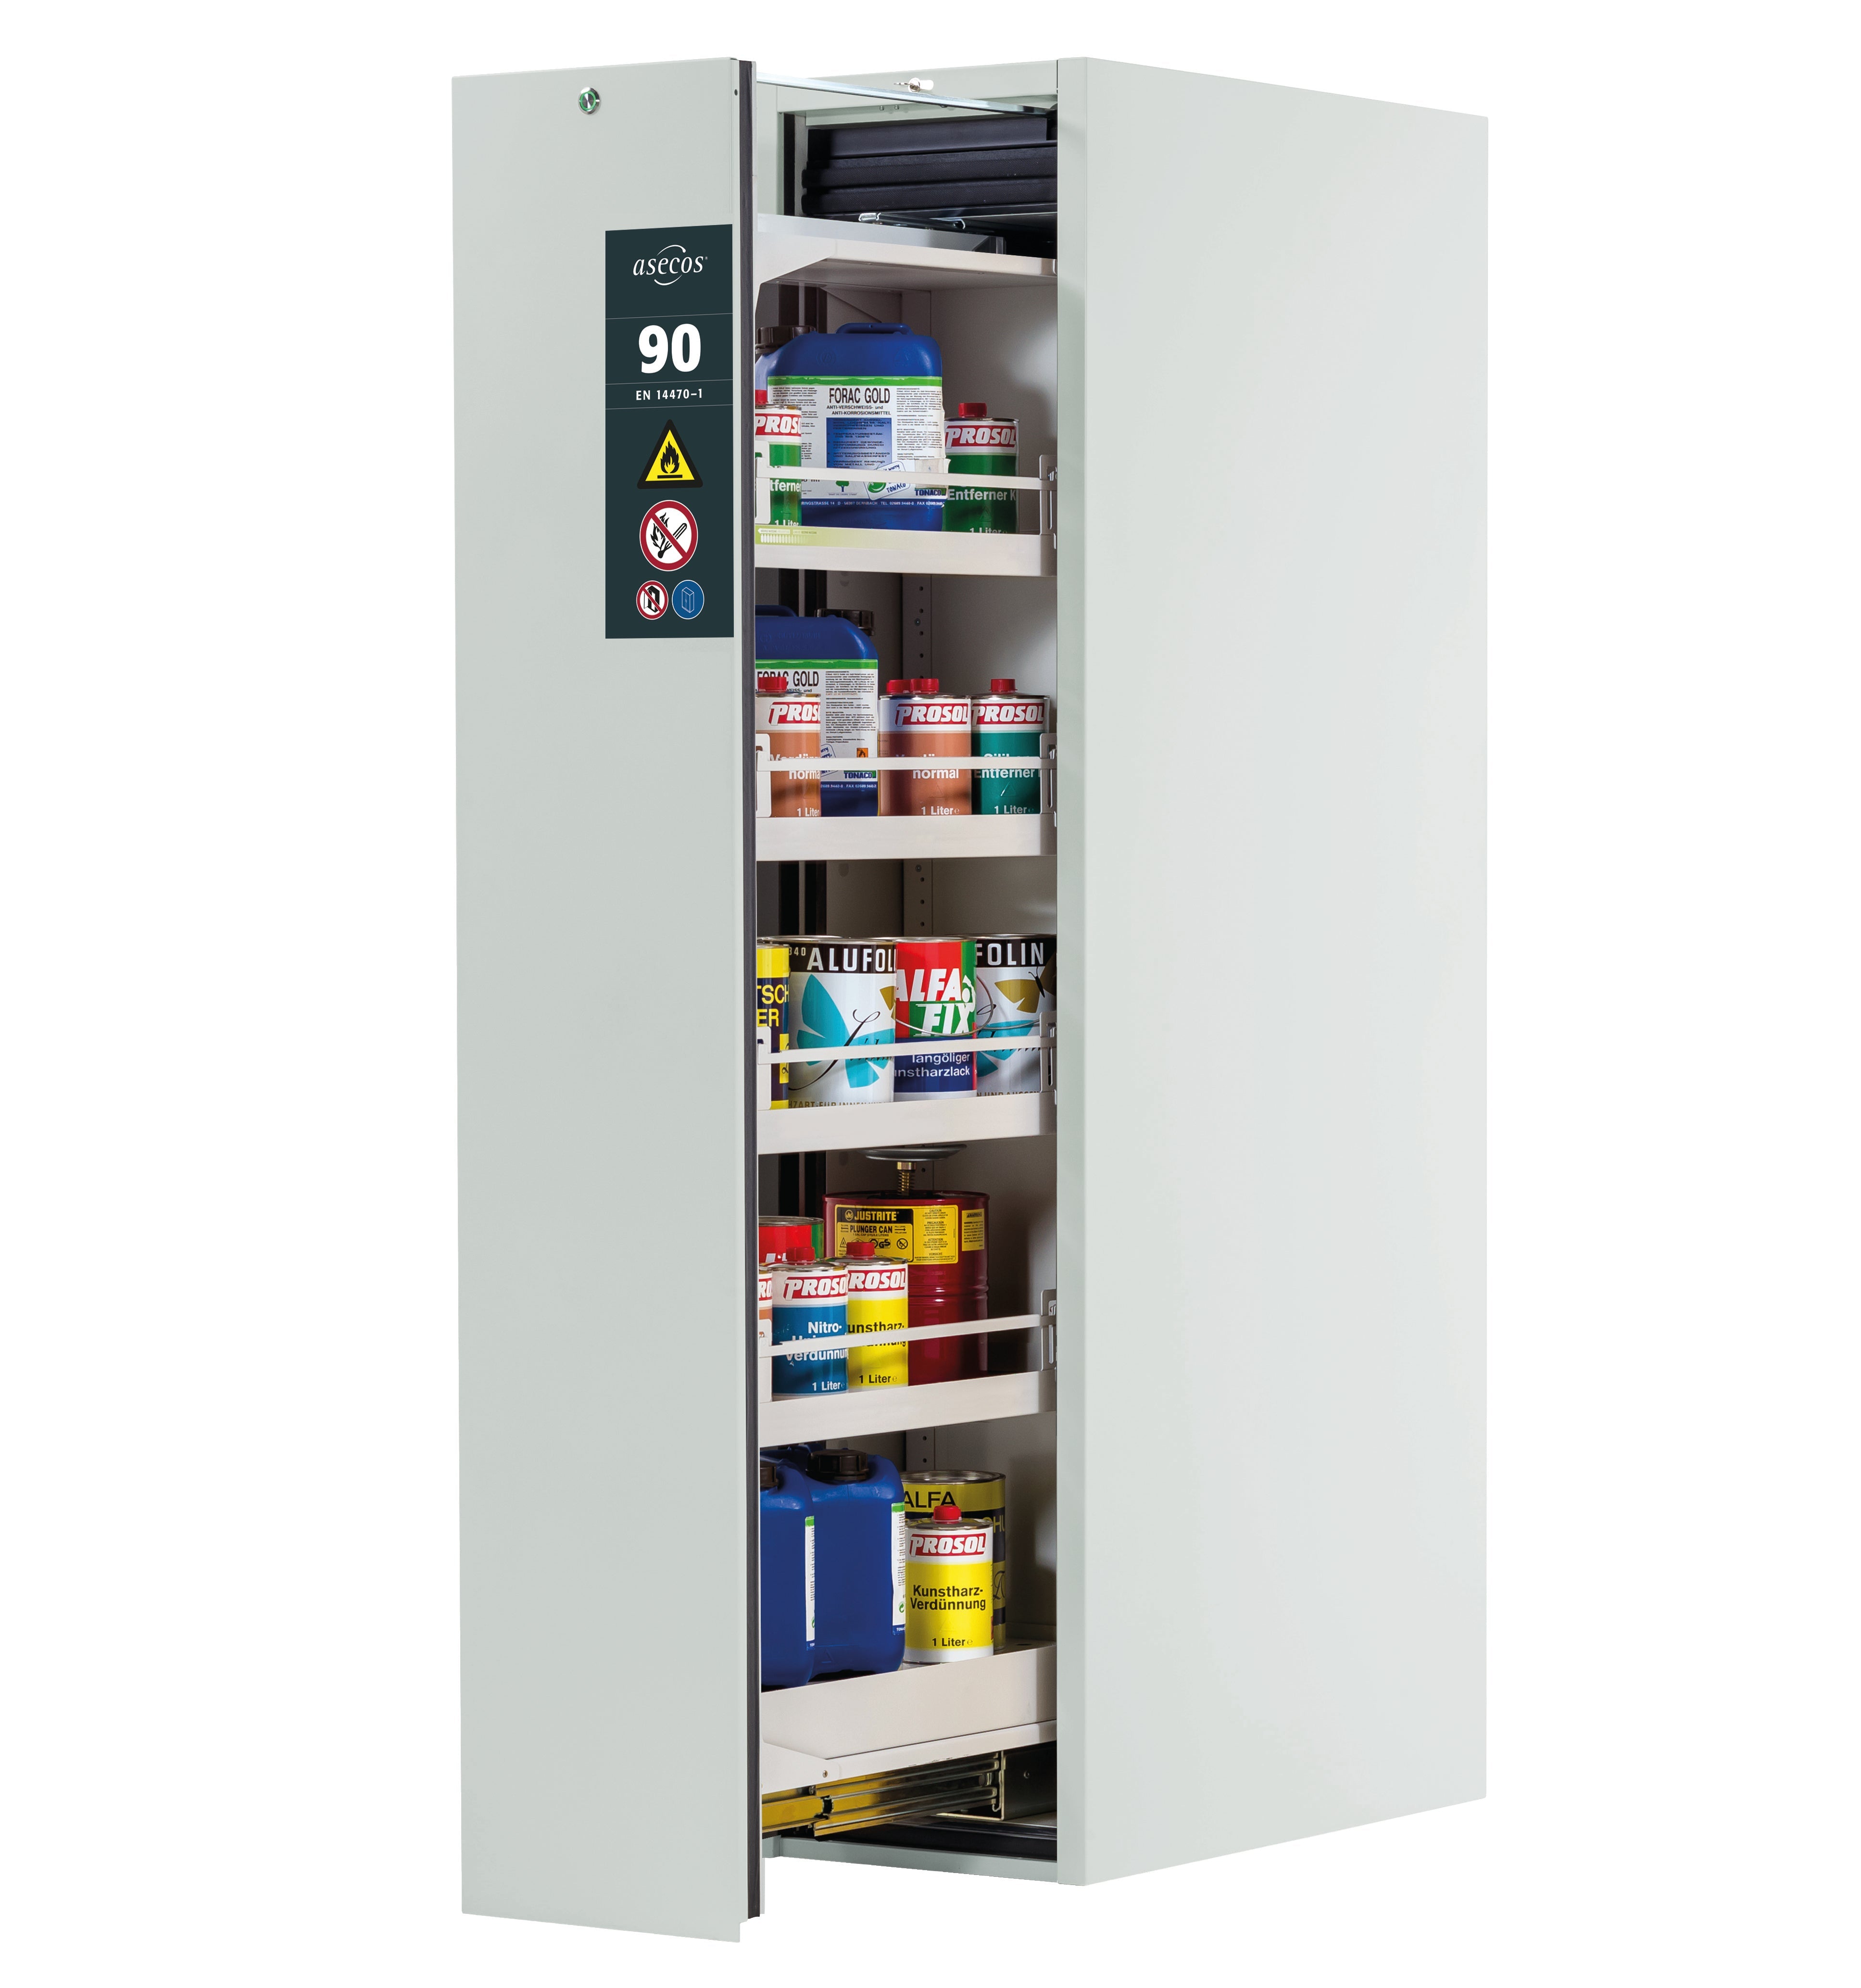 Type 90 safety cabinet V-MOVE-90 model V90.196.045.VDAC:0012 in light gray RAL 7035 with 4x standard tray base (sheet steel)